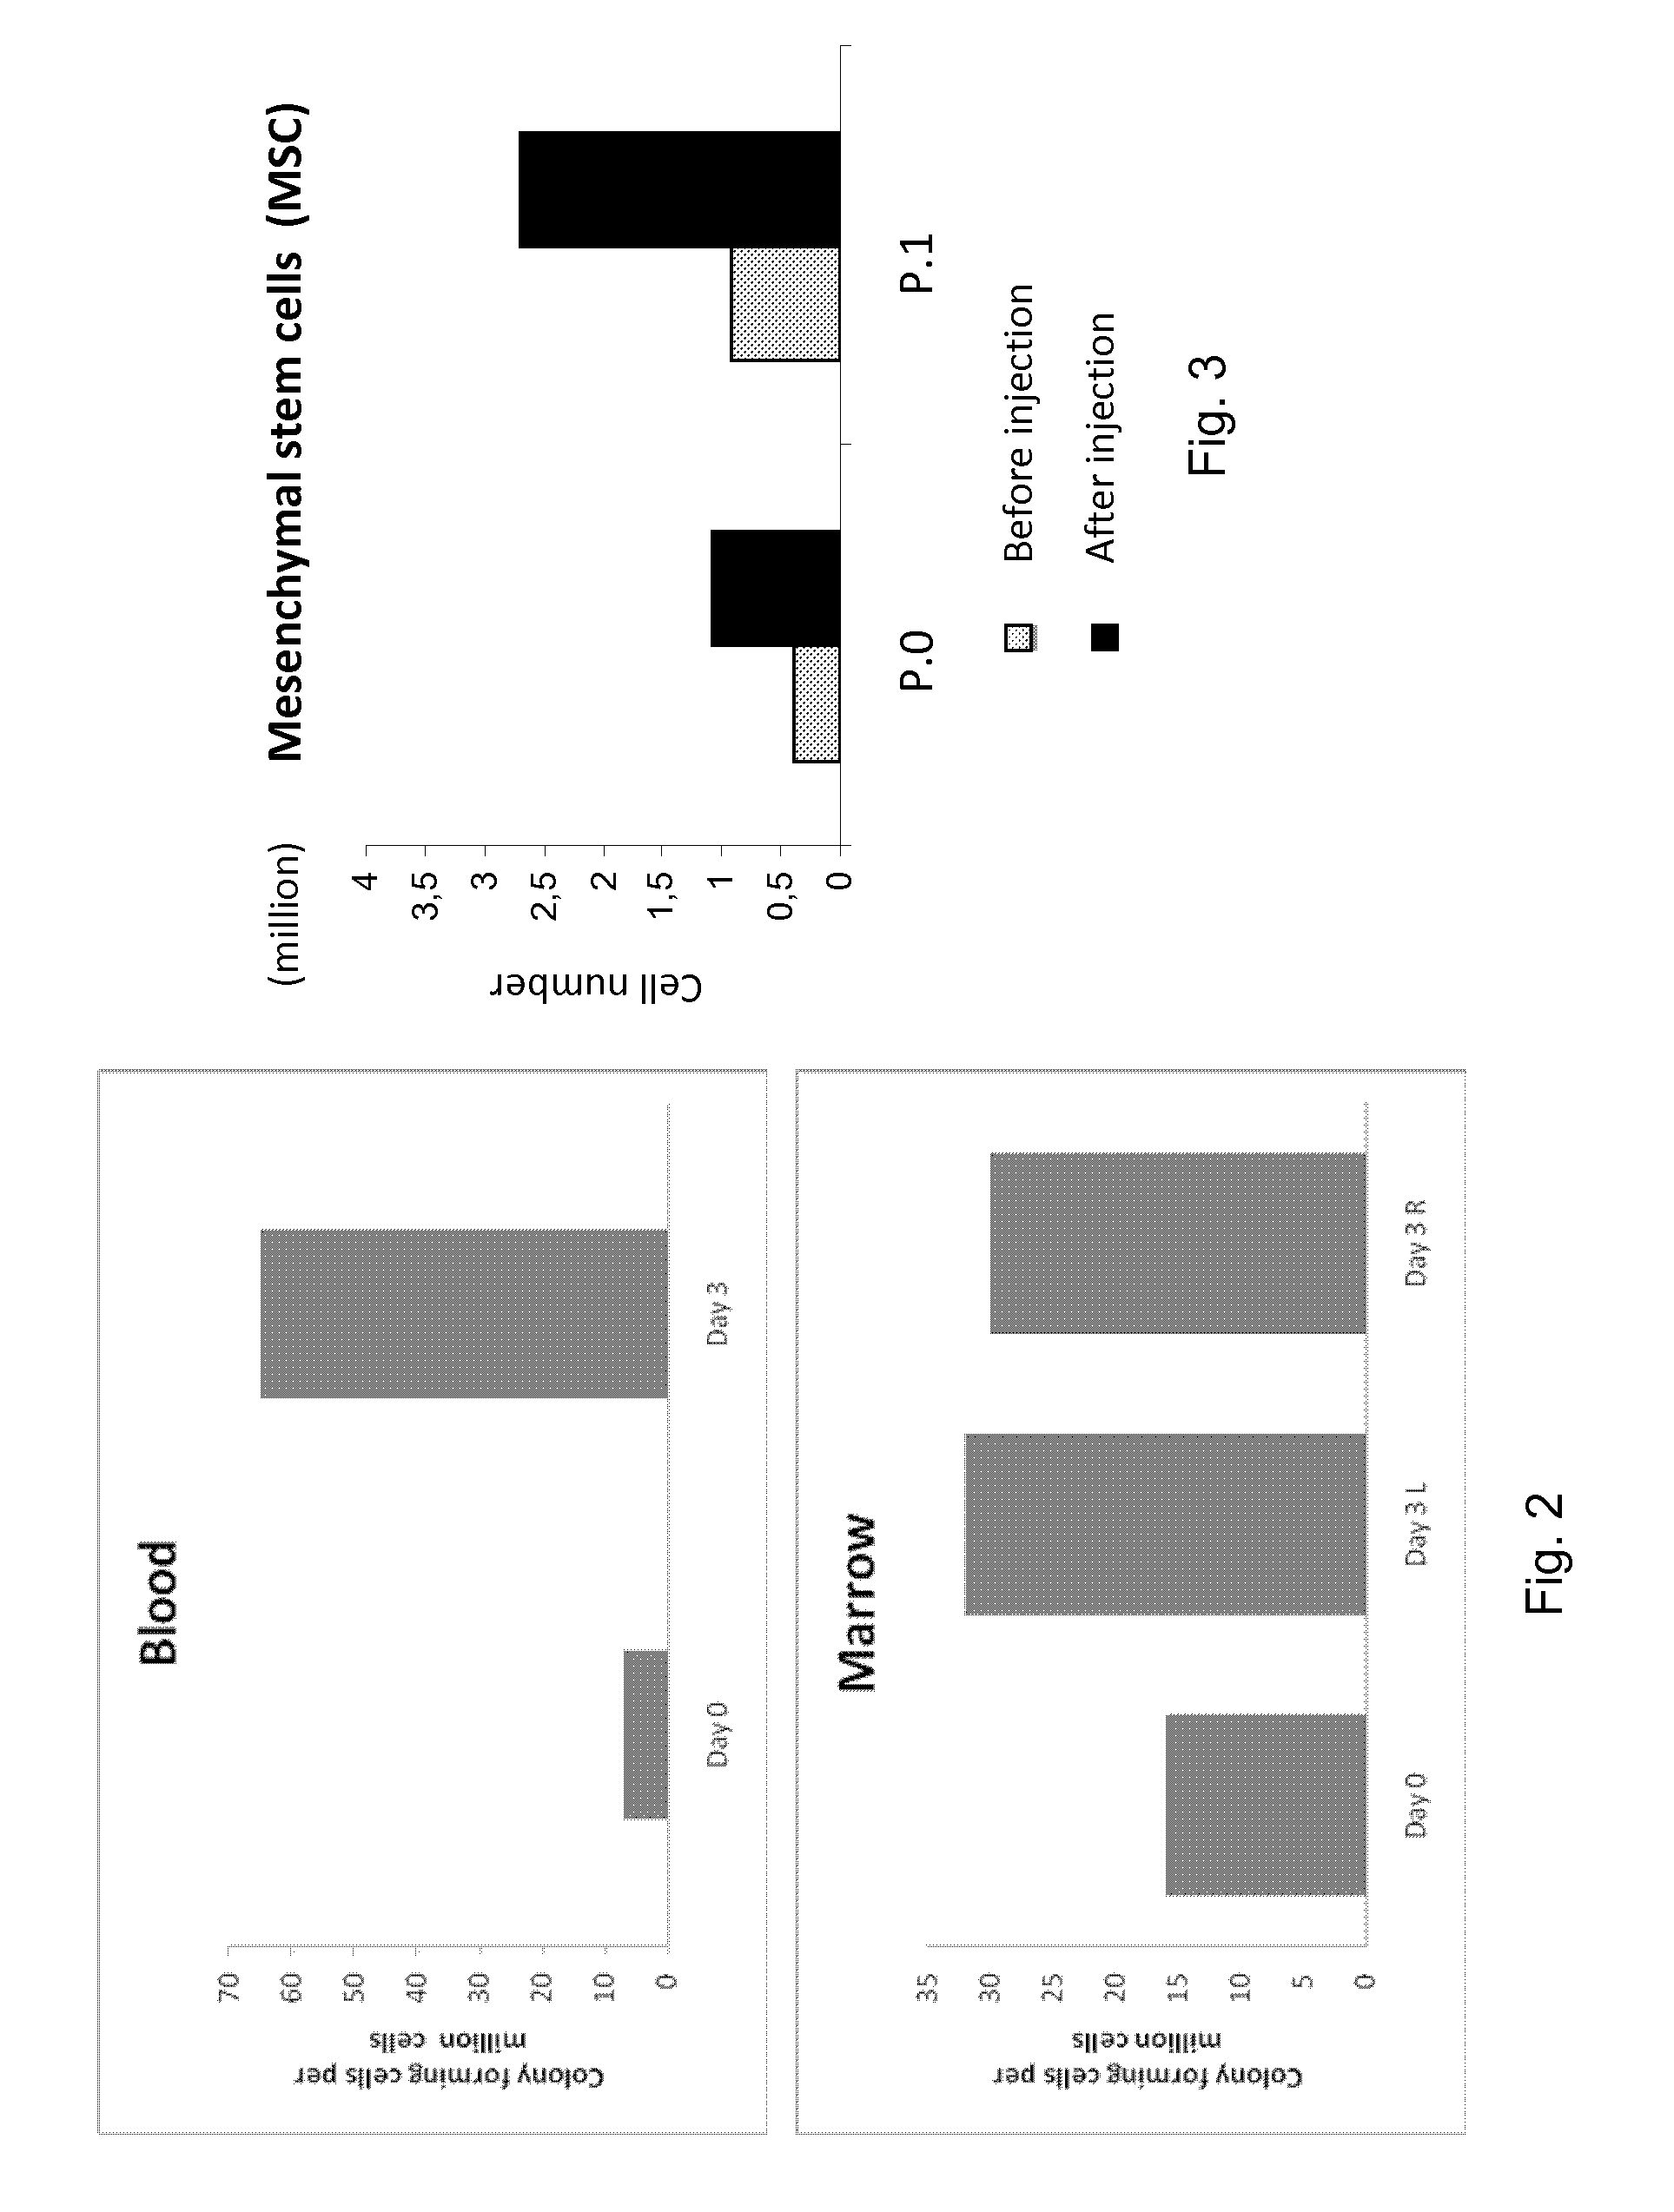 Method and means for producing tissues and tissues obtained